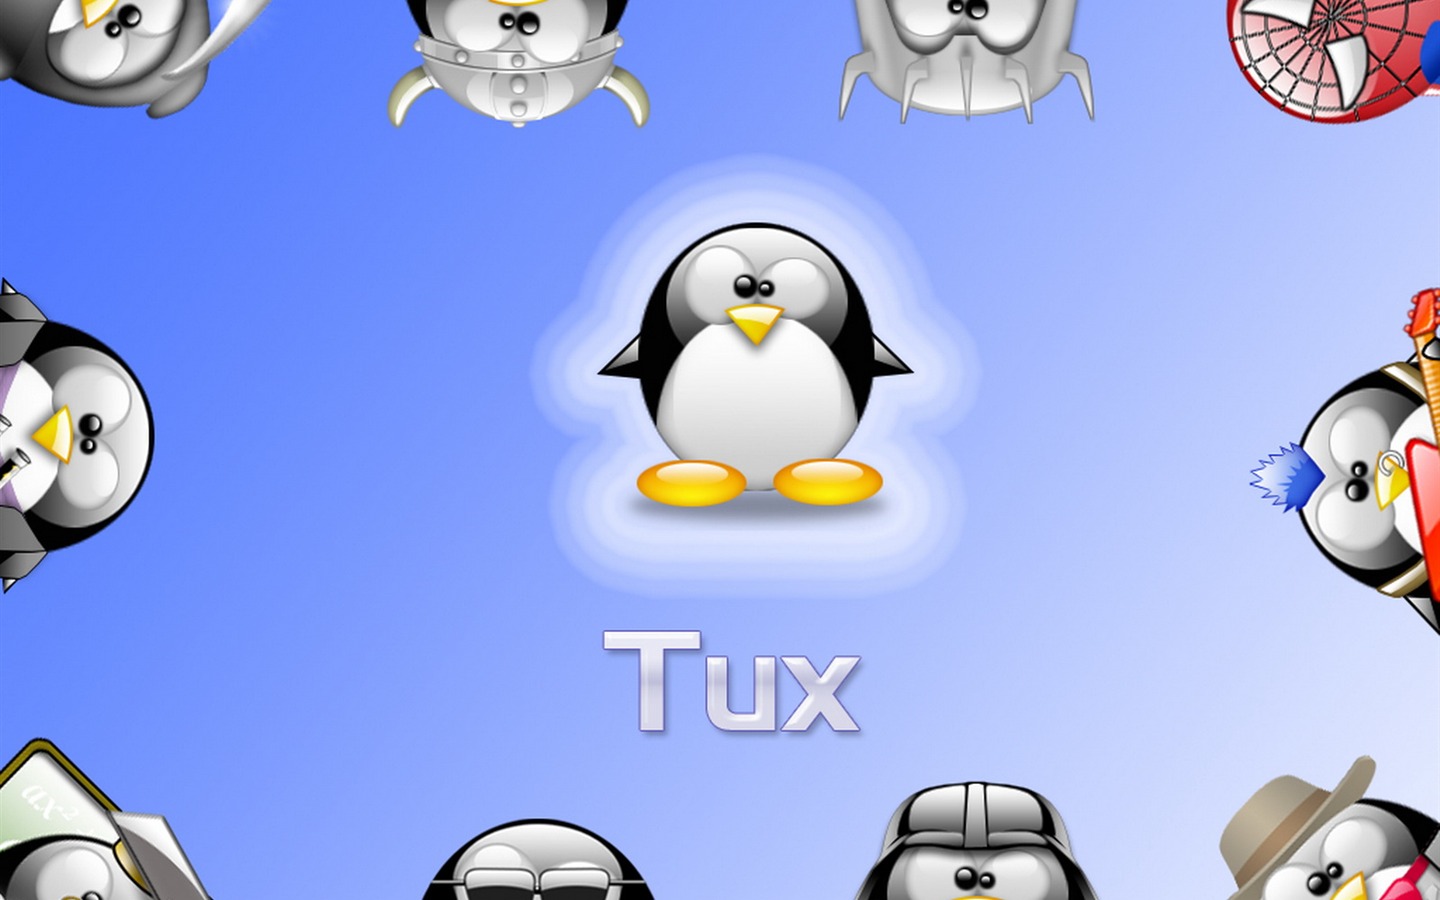 Linux tapety (3) #10 - 1440x900